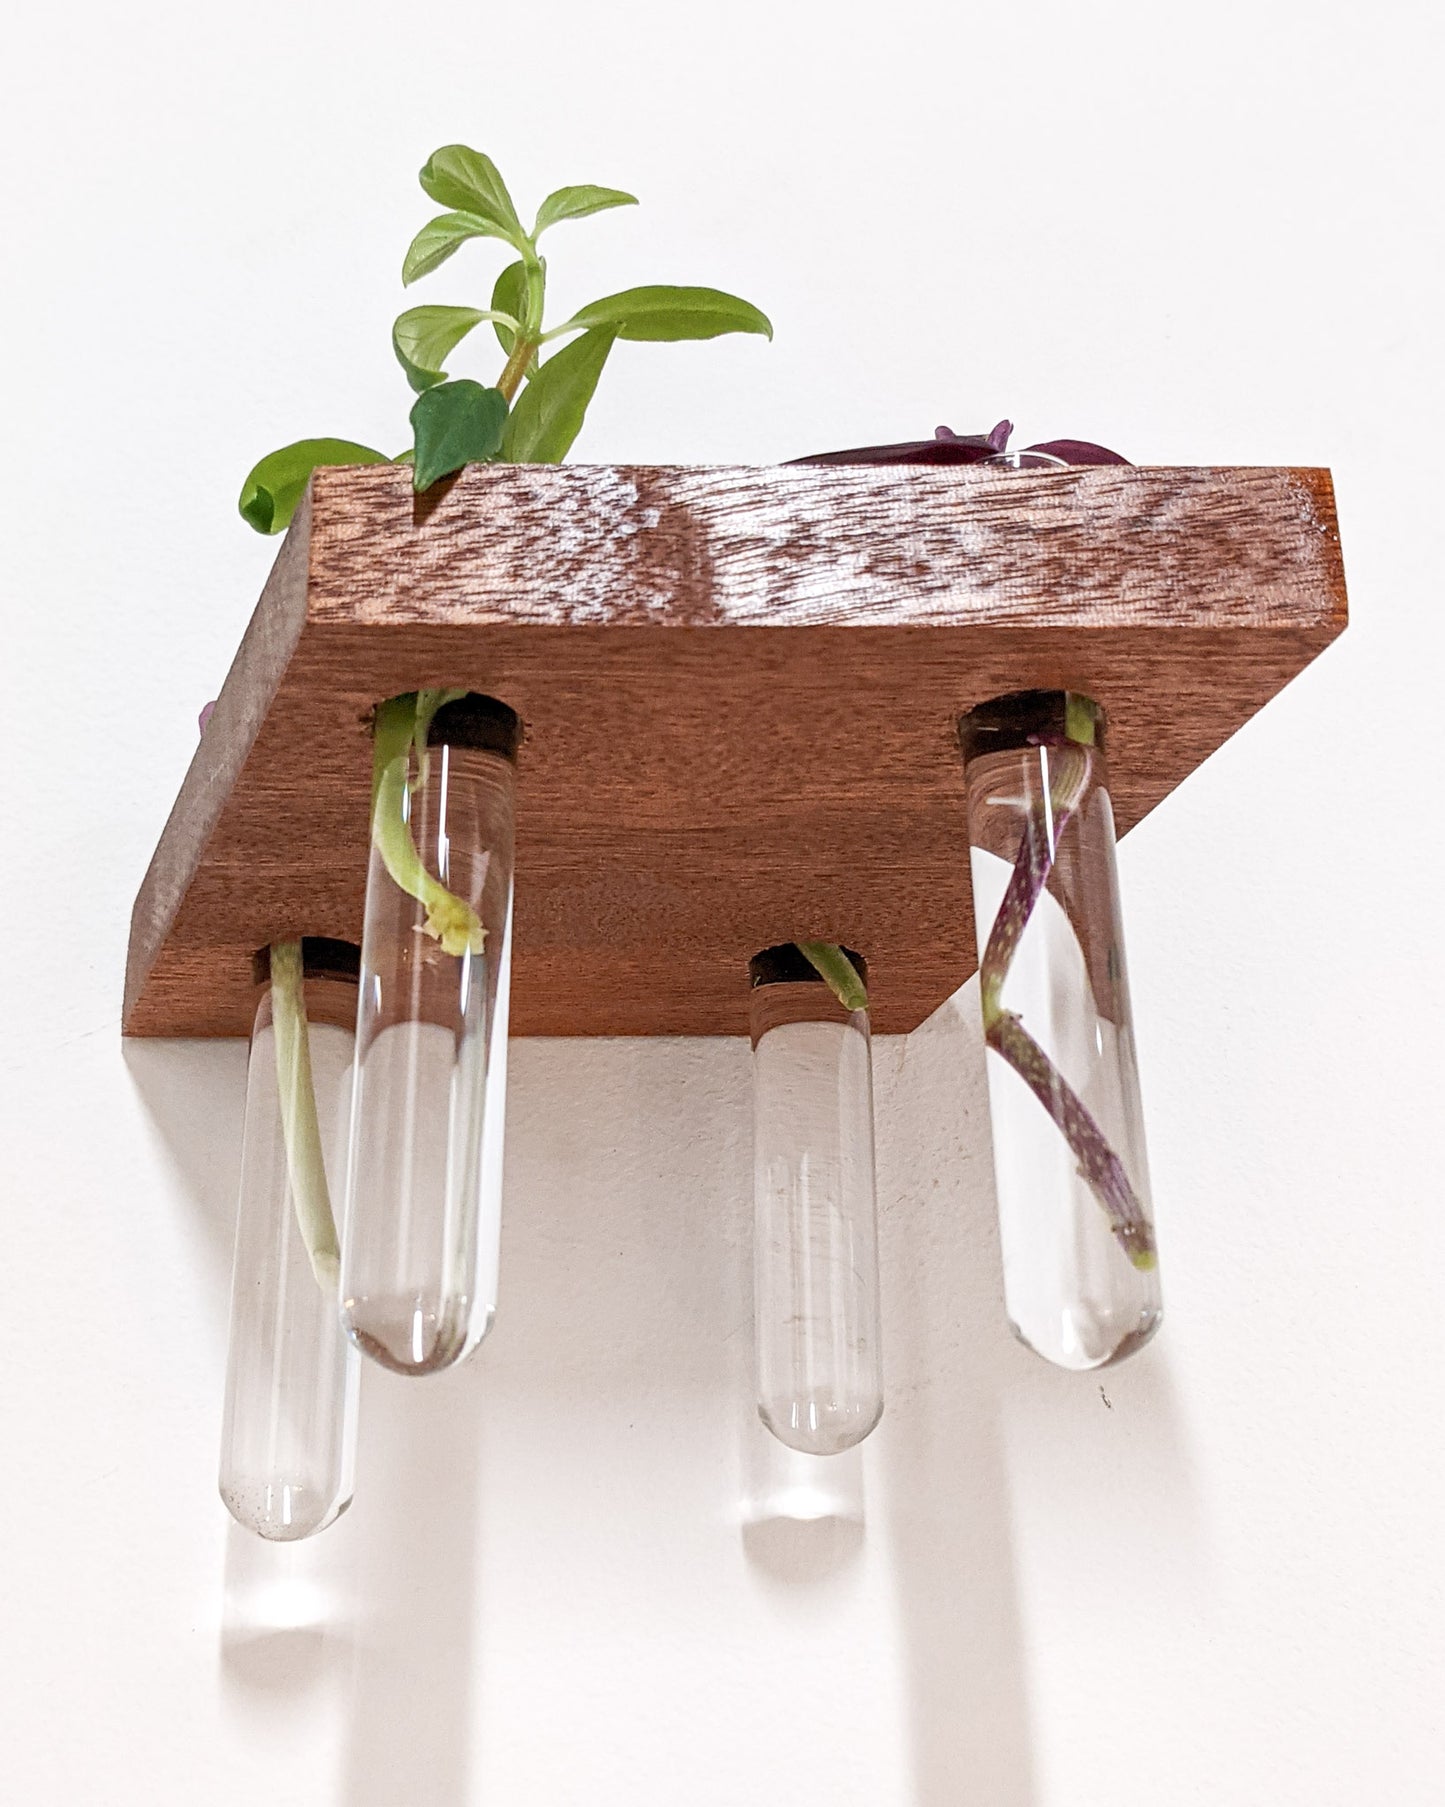 A close-up view of four hanging test tubes that are filled with water and hang from our Mahogany small wooden propagation shelf. Rooted cuttings of wandering jew and a pothos peak over the top edge of the shelf. 